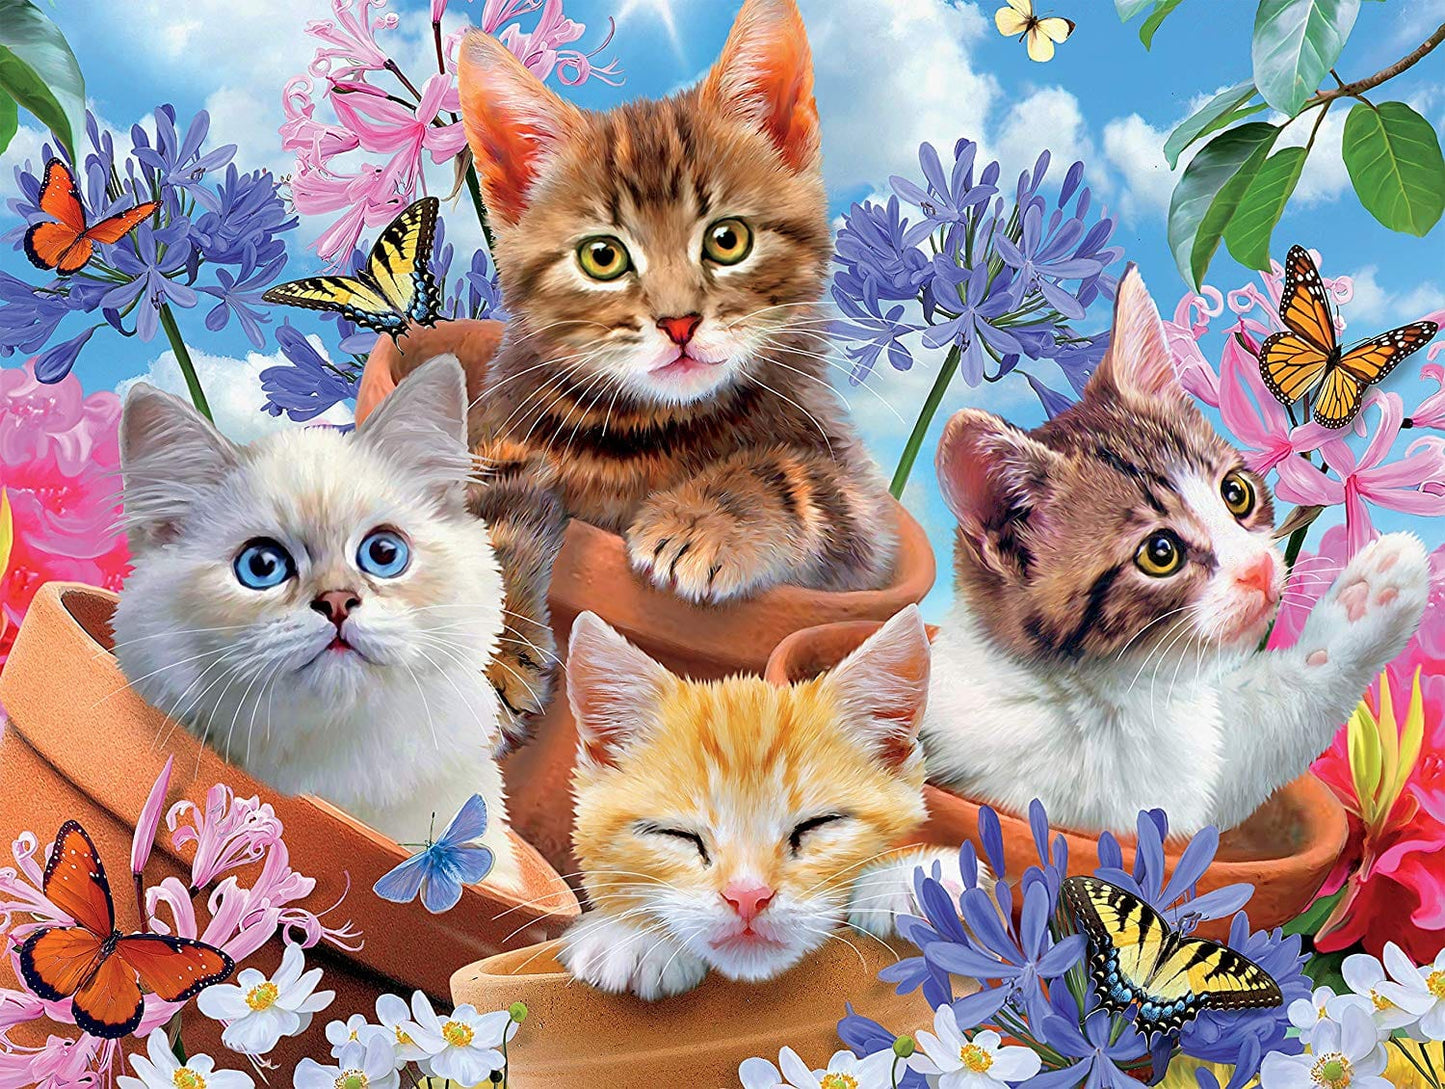 Harmony Kittens in Flower Pots 550 Piece Puzzle - Shelburne Country Store